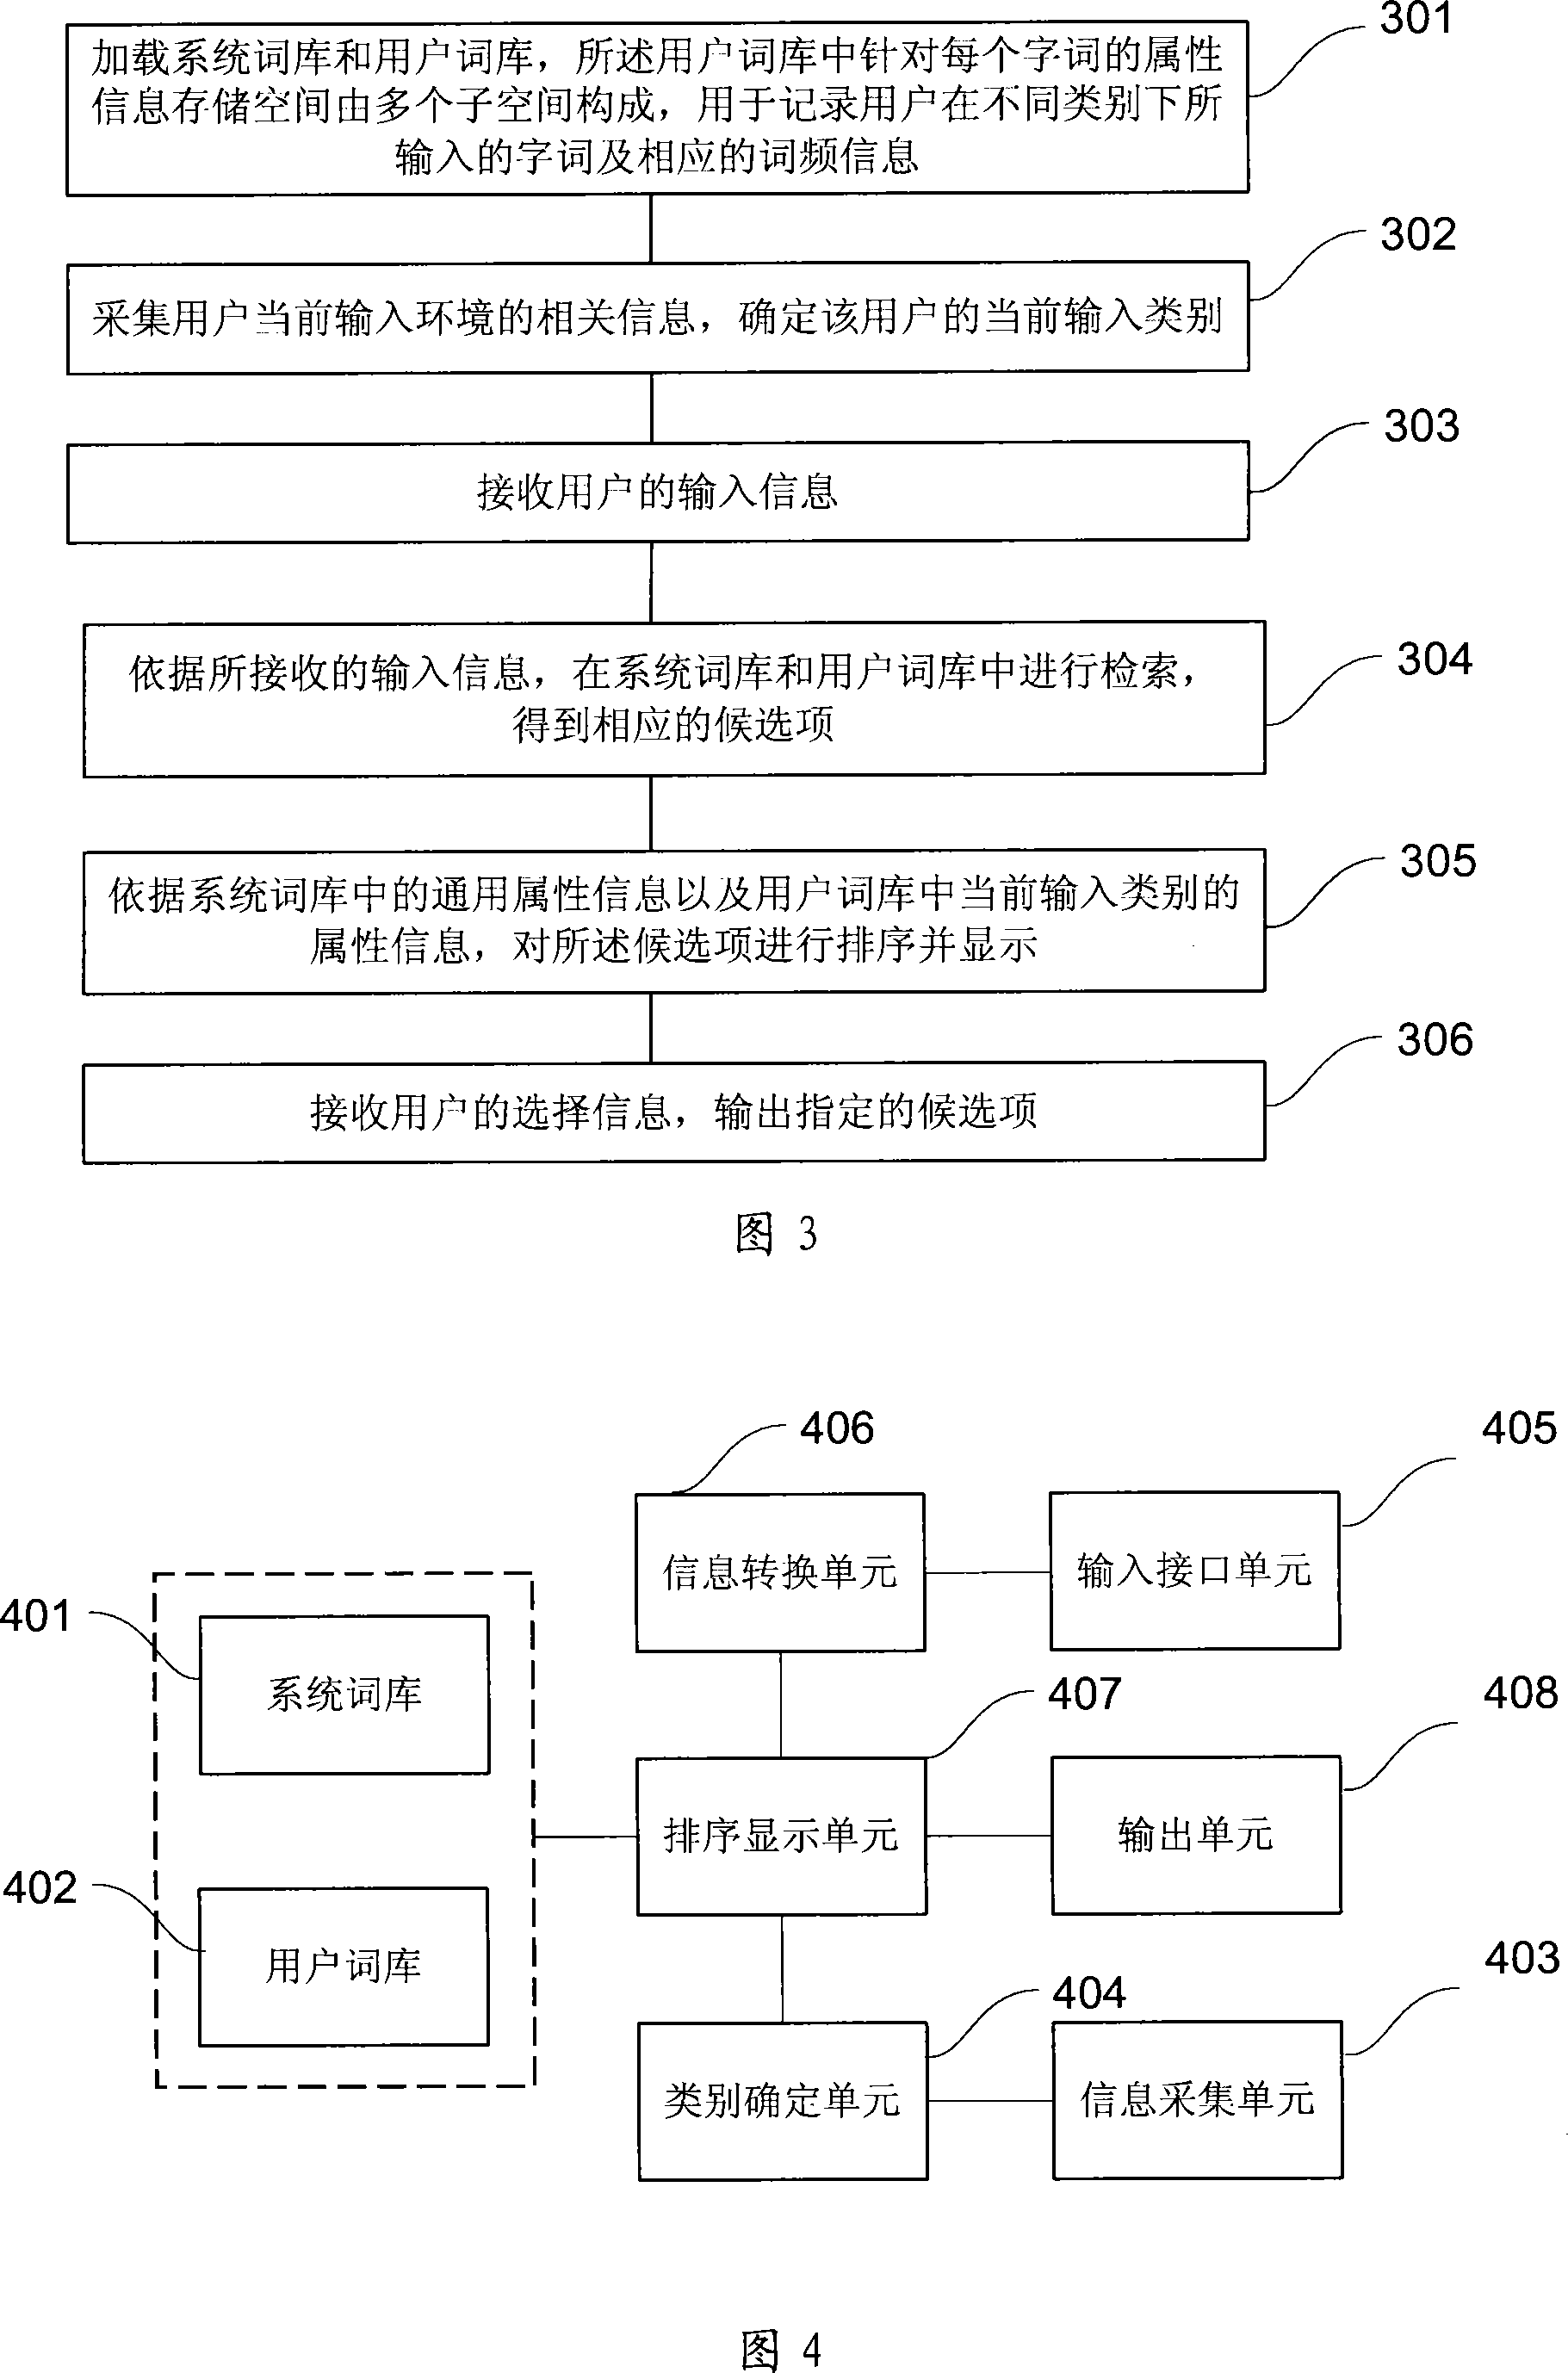 Method and apparatus for recording information into user thesaurus